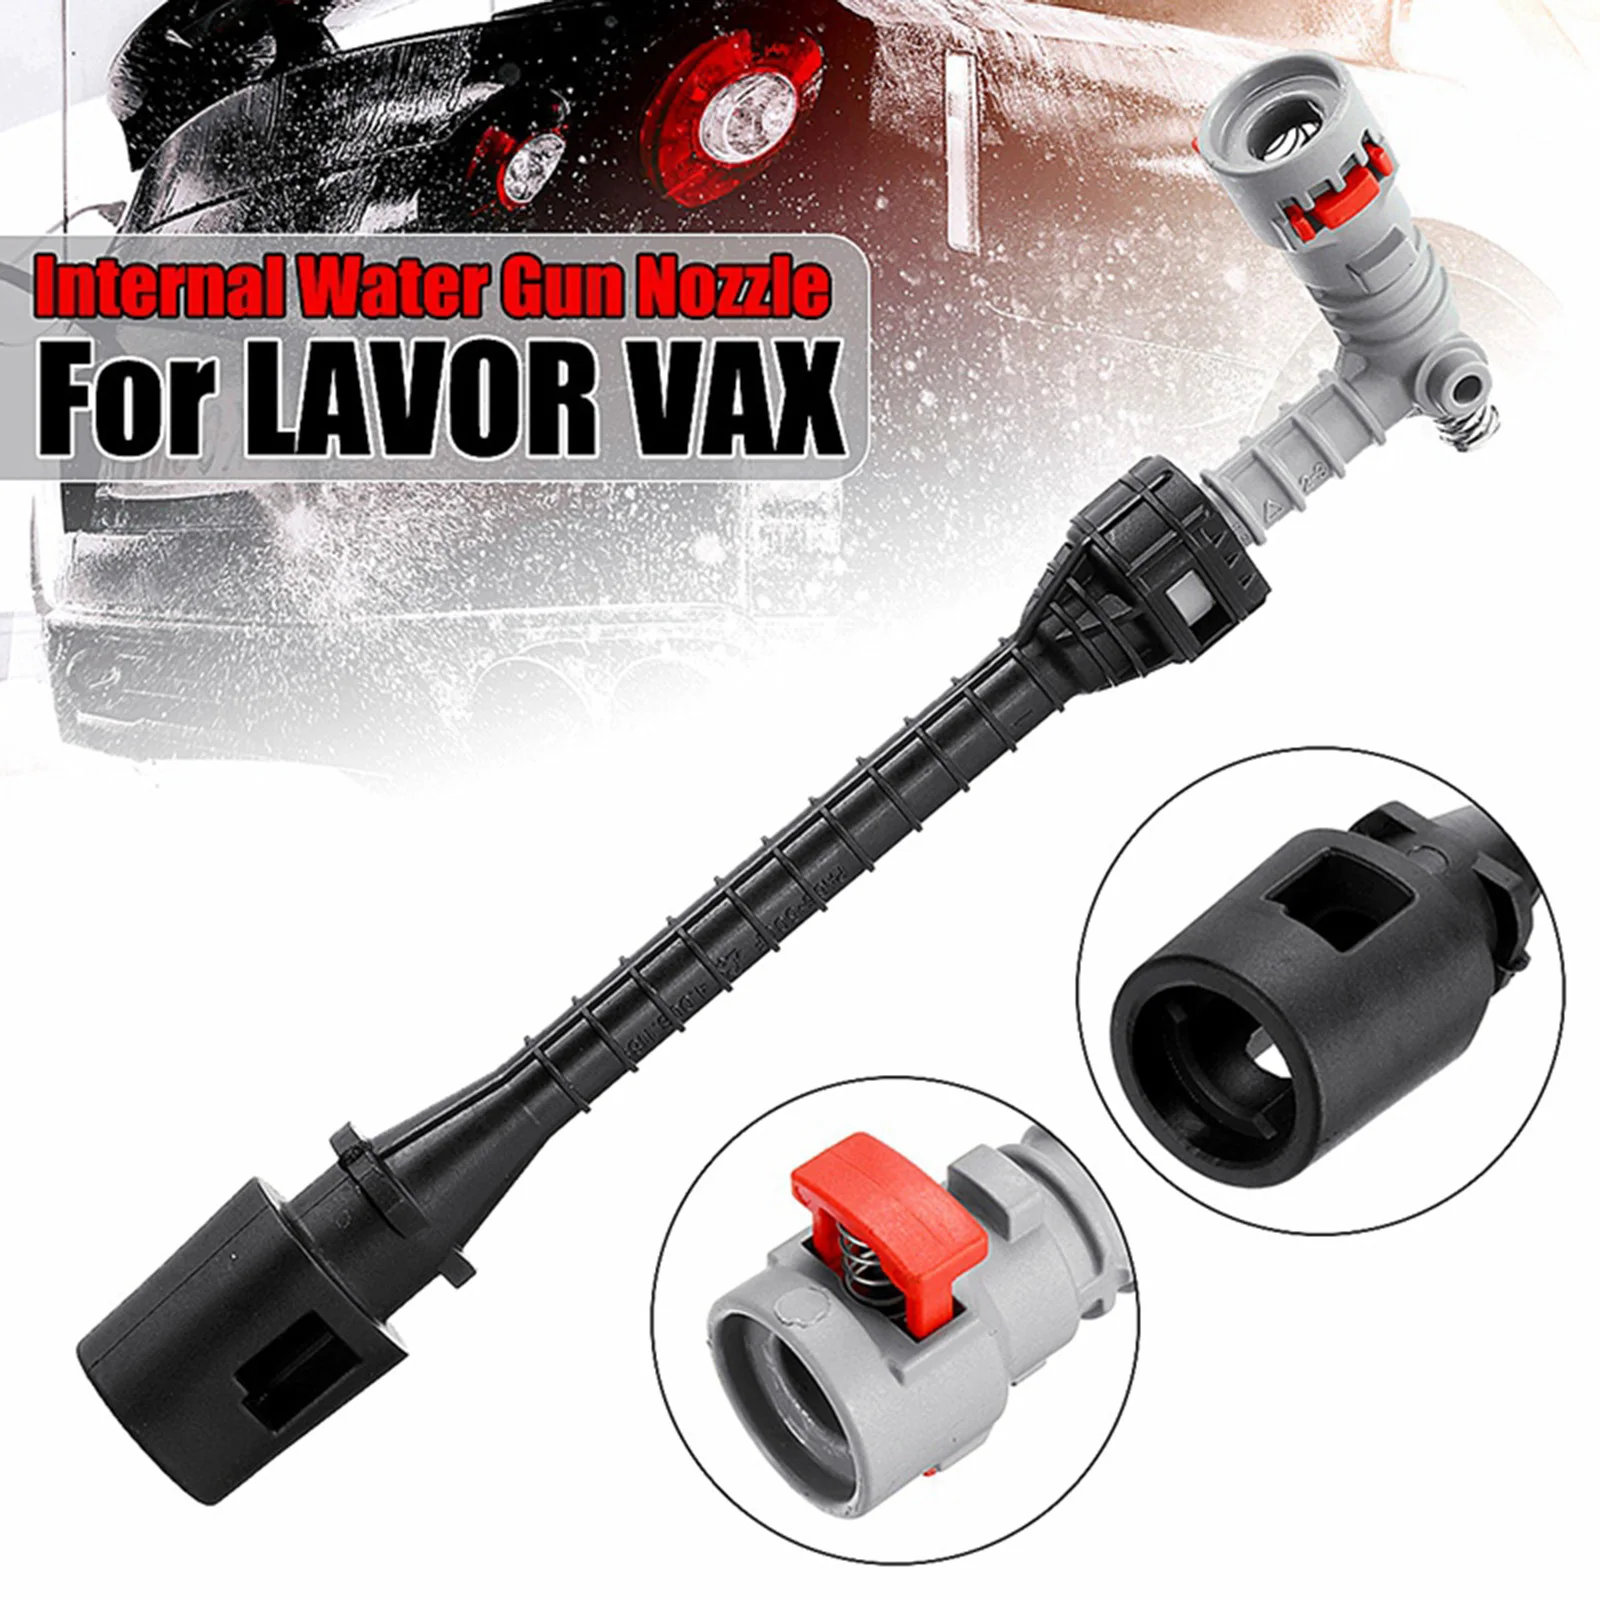 Car Water-Gun Nozzle for Lavor High Pressure Washer Home Car Garden Cleaning Washing Tools Sprayer Parts